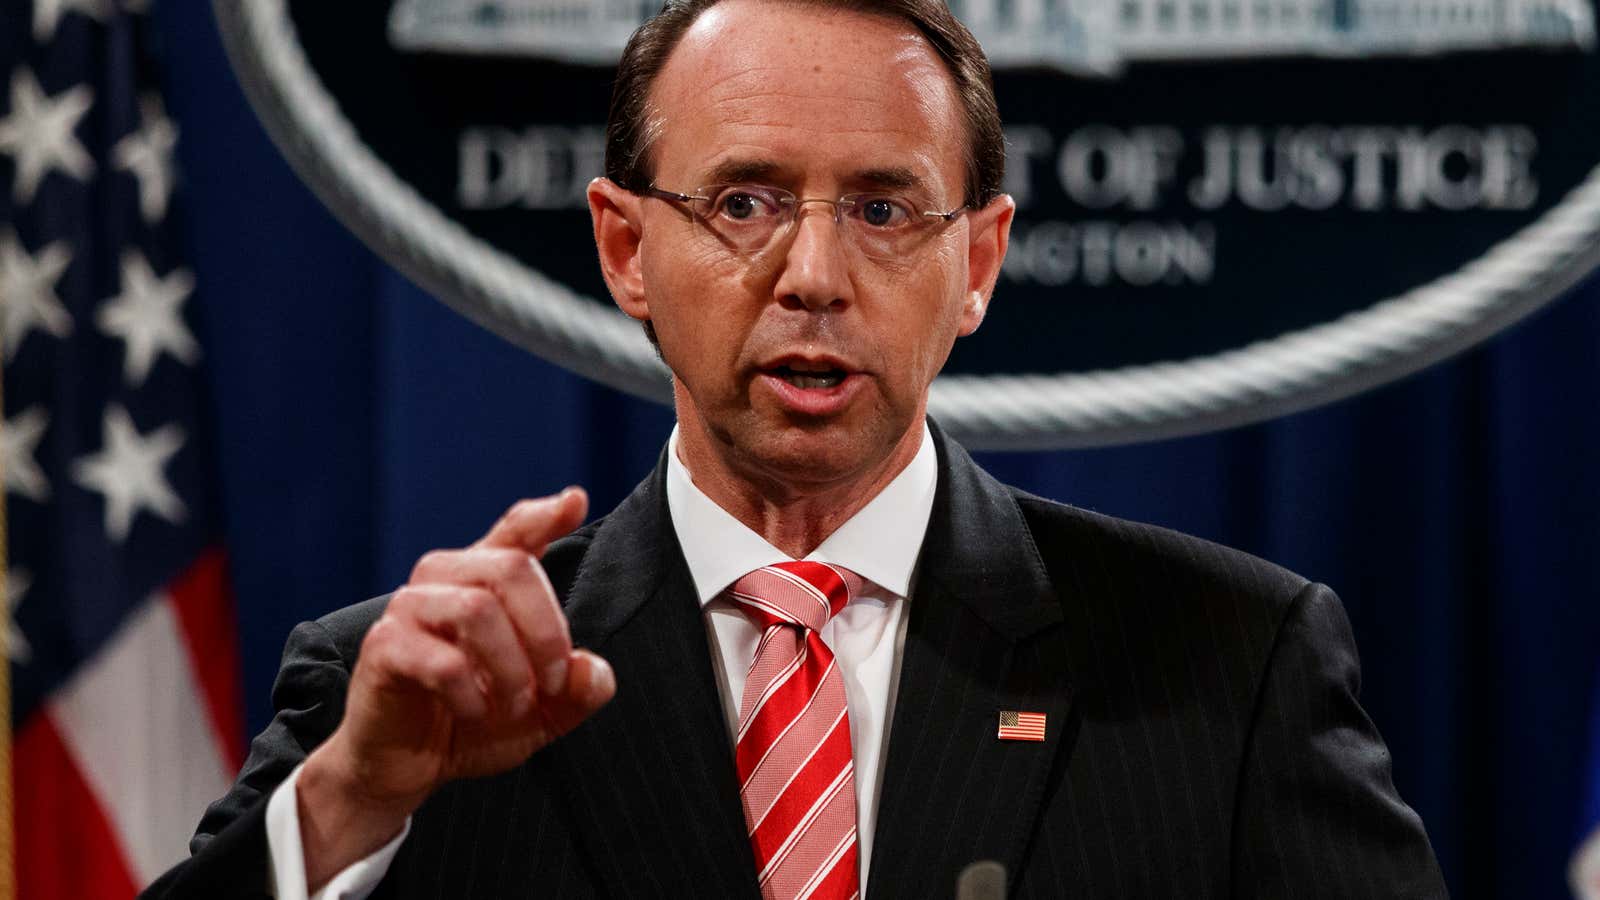 Deputy Attorney General Rod Rosenstein announced the 12 Russian indictments today.